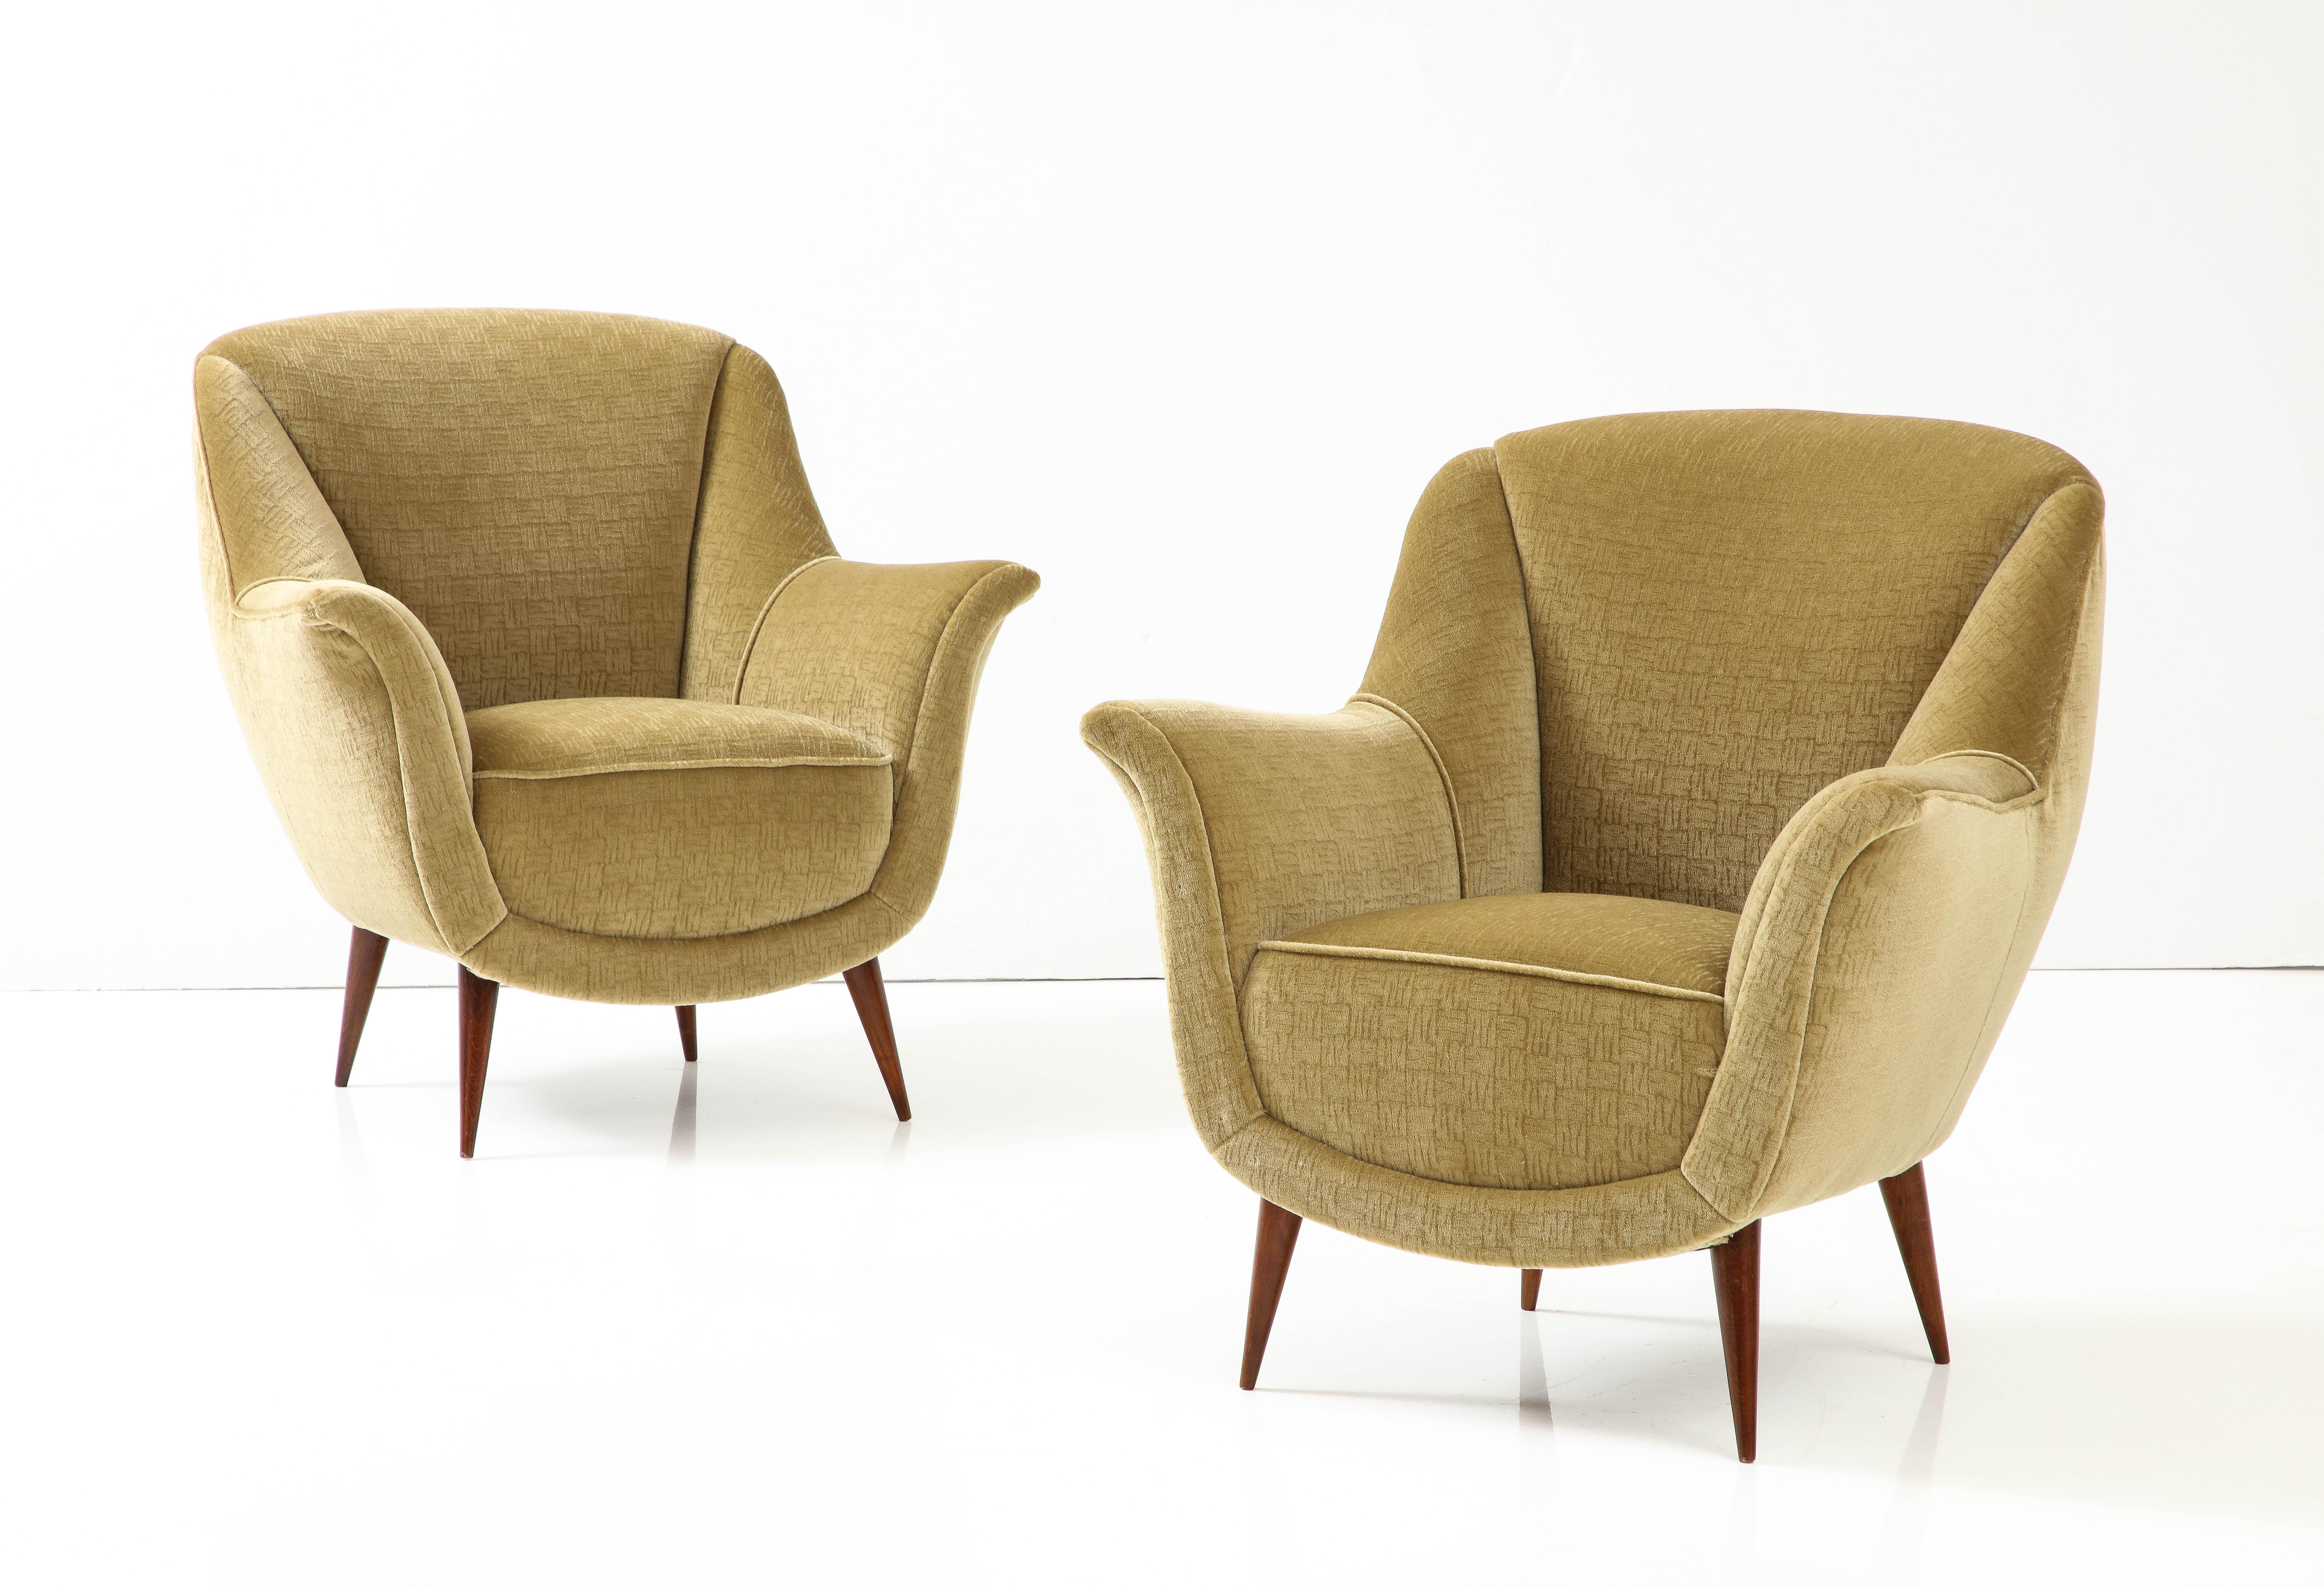 1950's Modernist Gio Ponti Style Italian Lounge Chairs In Mohair Upholstery For Sale 3